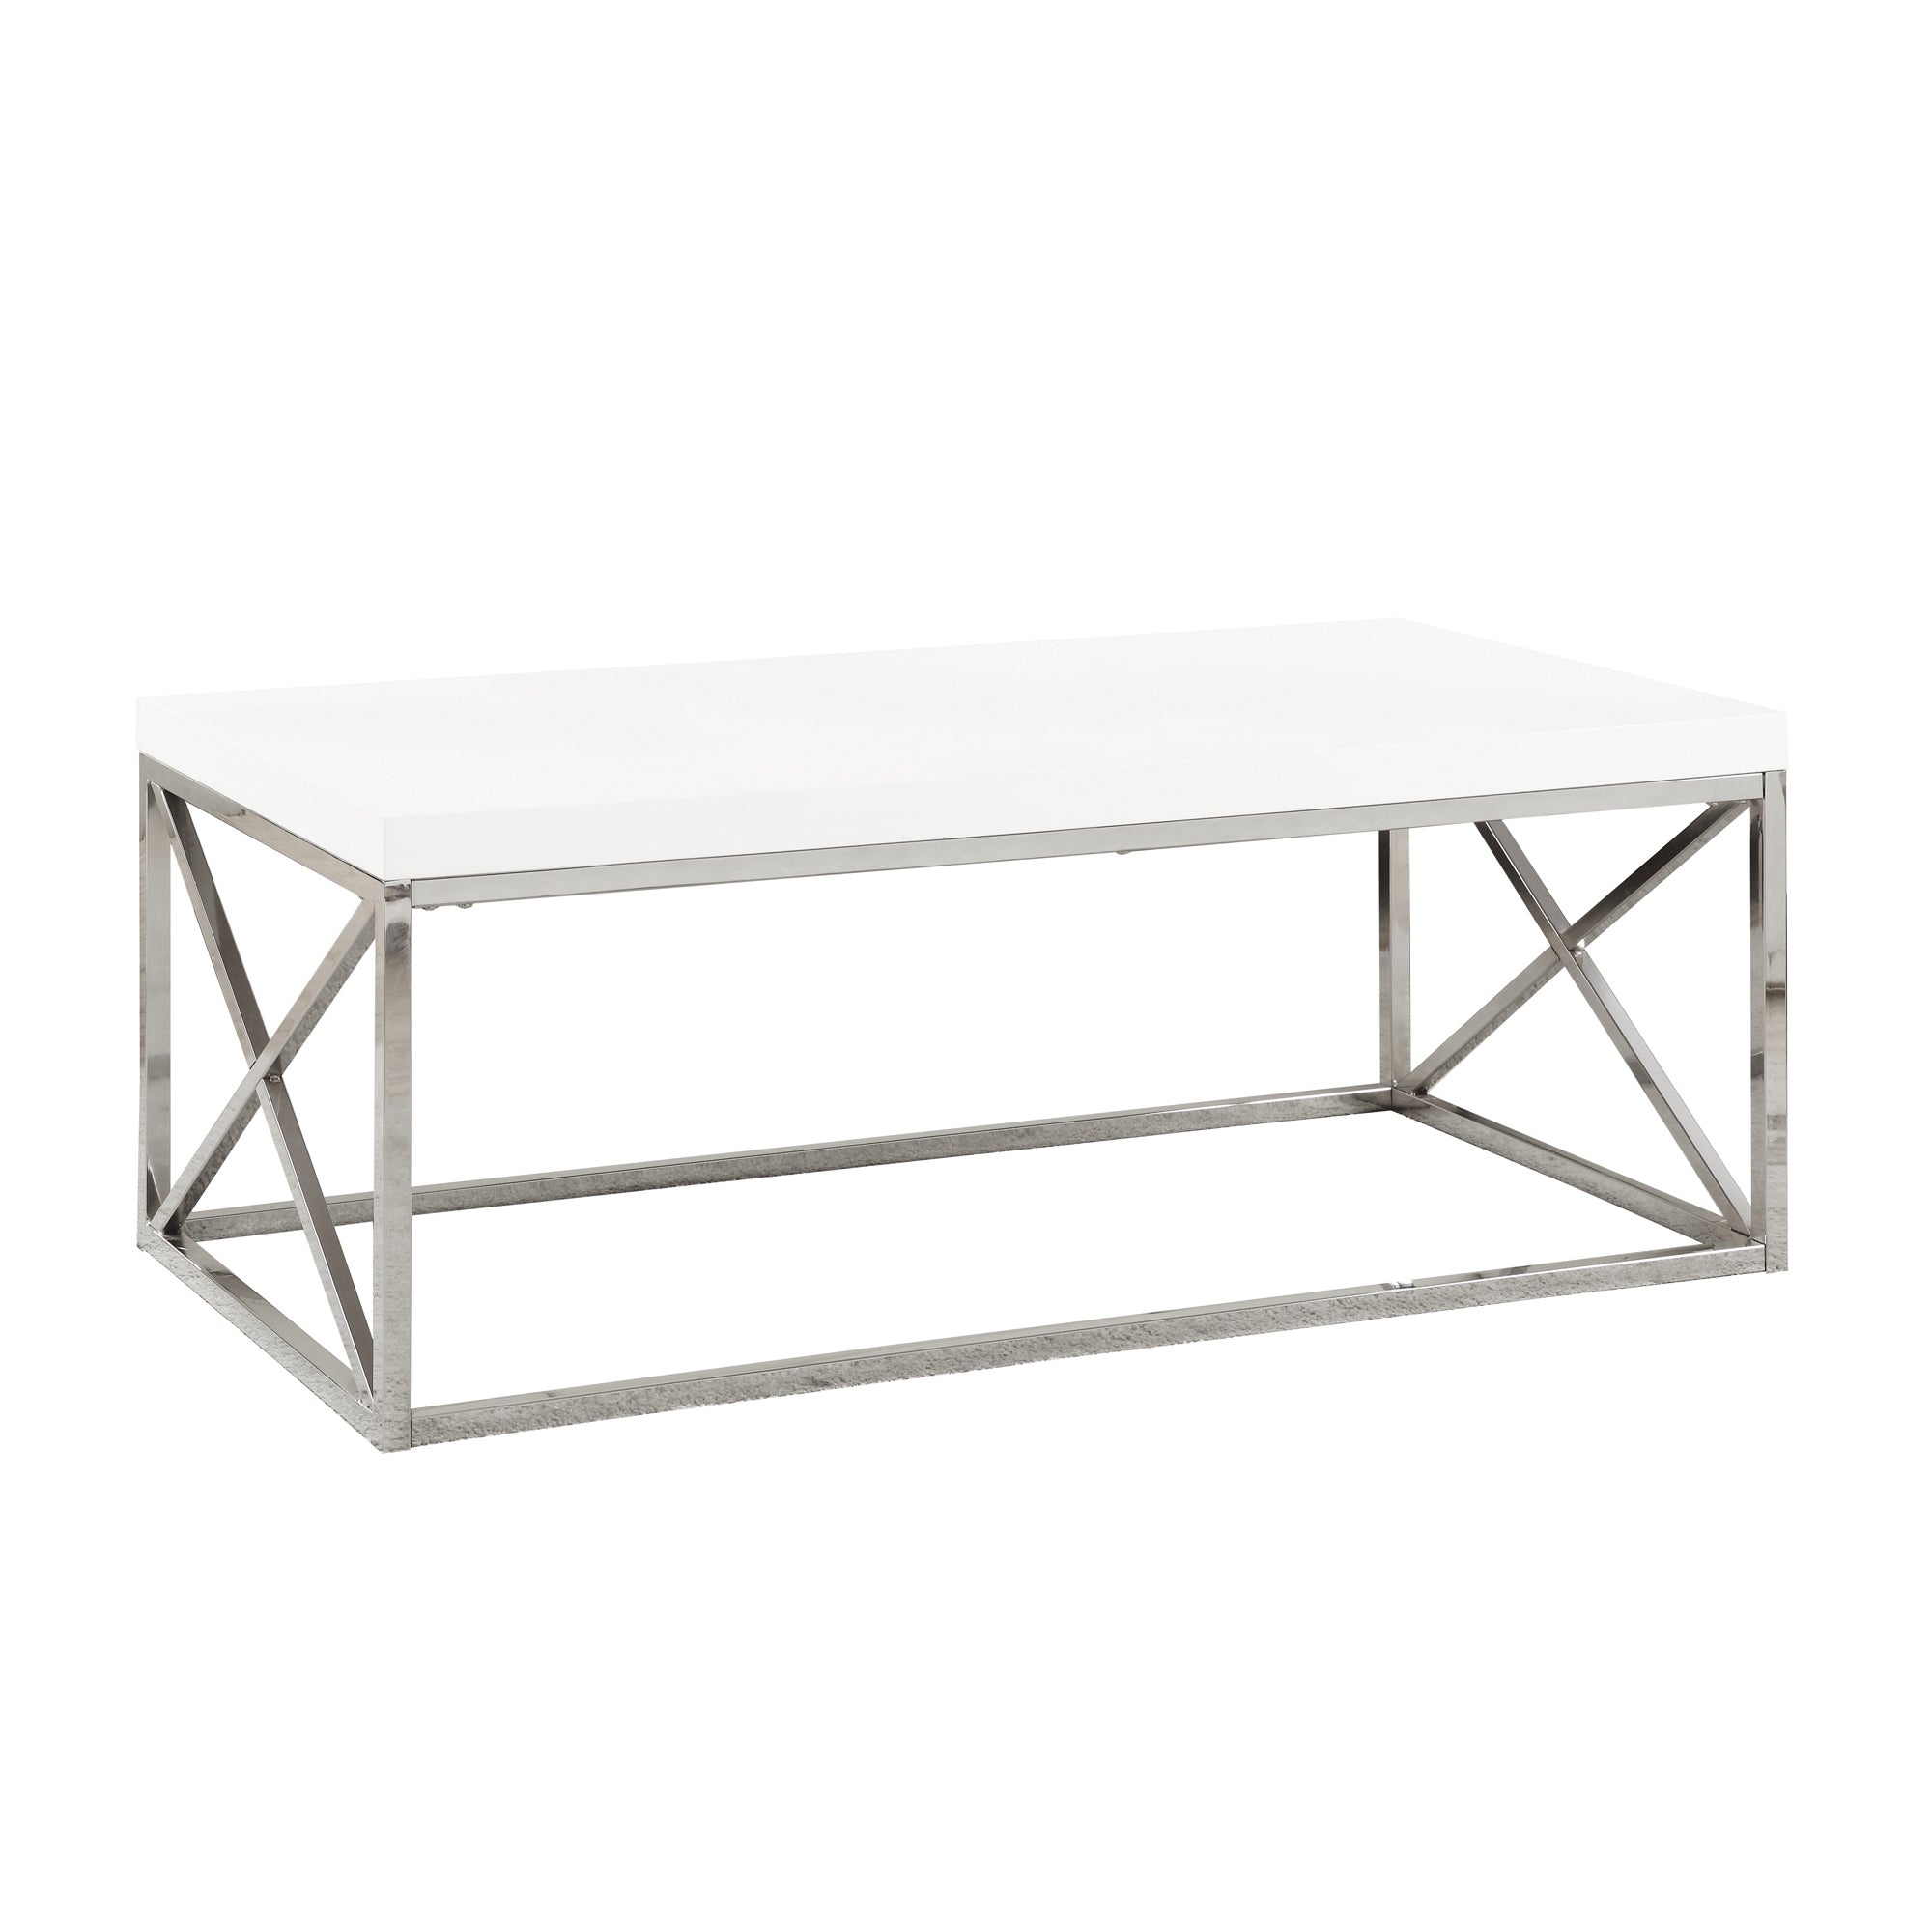 MN-833028    Coffee Table, Accent, Cocktail, Rectangular, Living Room, Metal Frame, Laminate, Glossy White, Chrome, Contemporary, Modern